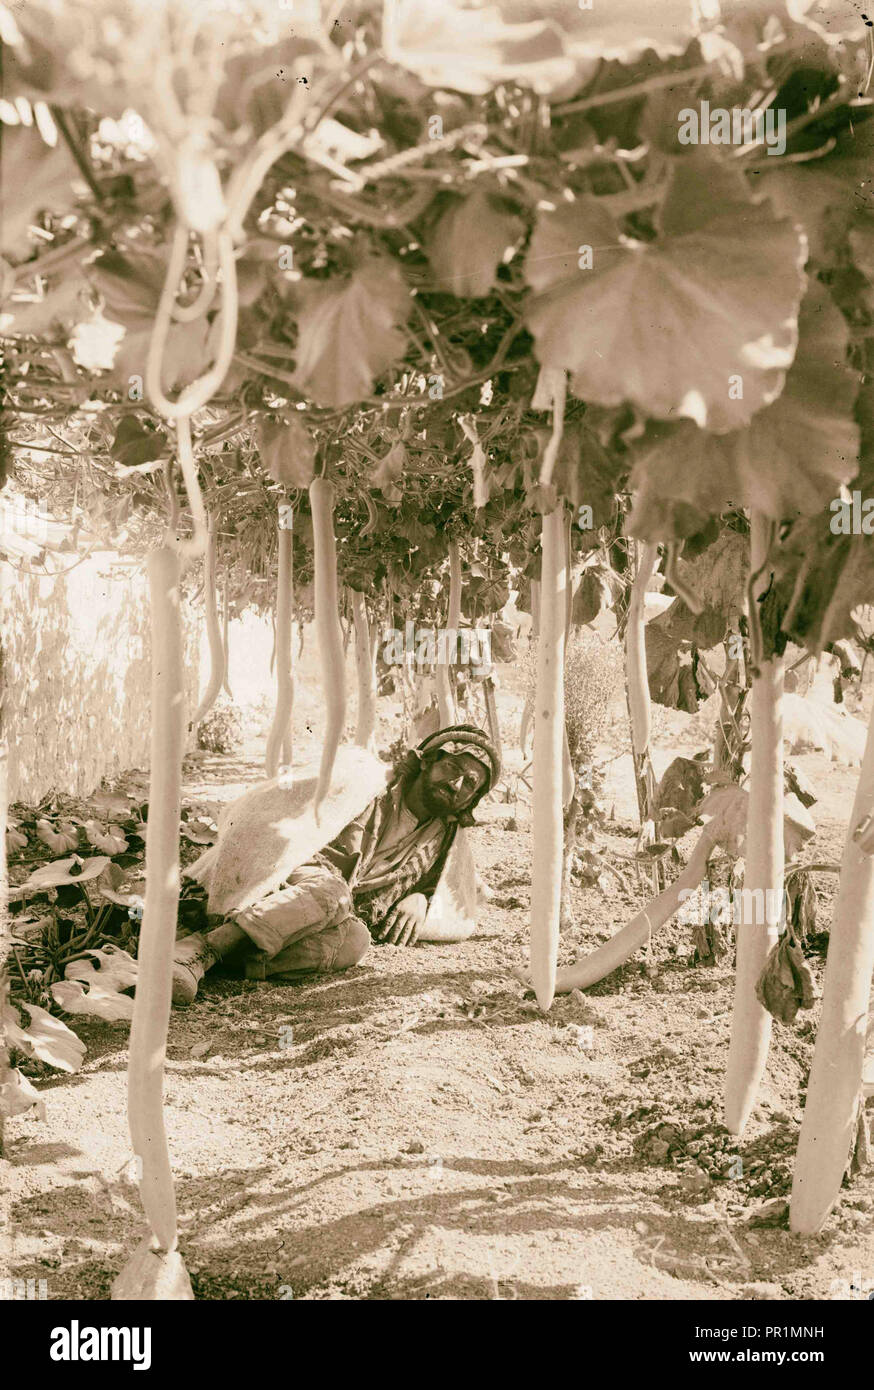 Economic plants. Long gourds (Lagenaria vulgaris Ser.). 1900, Middle East, Israel and/or Palestine Stock Photo